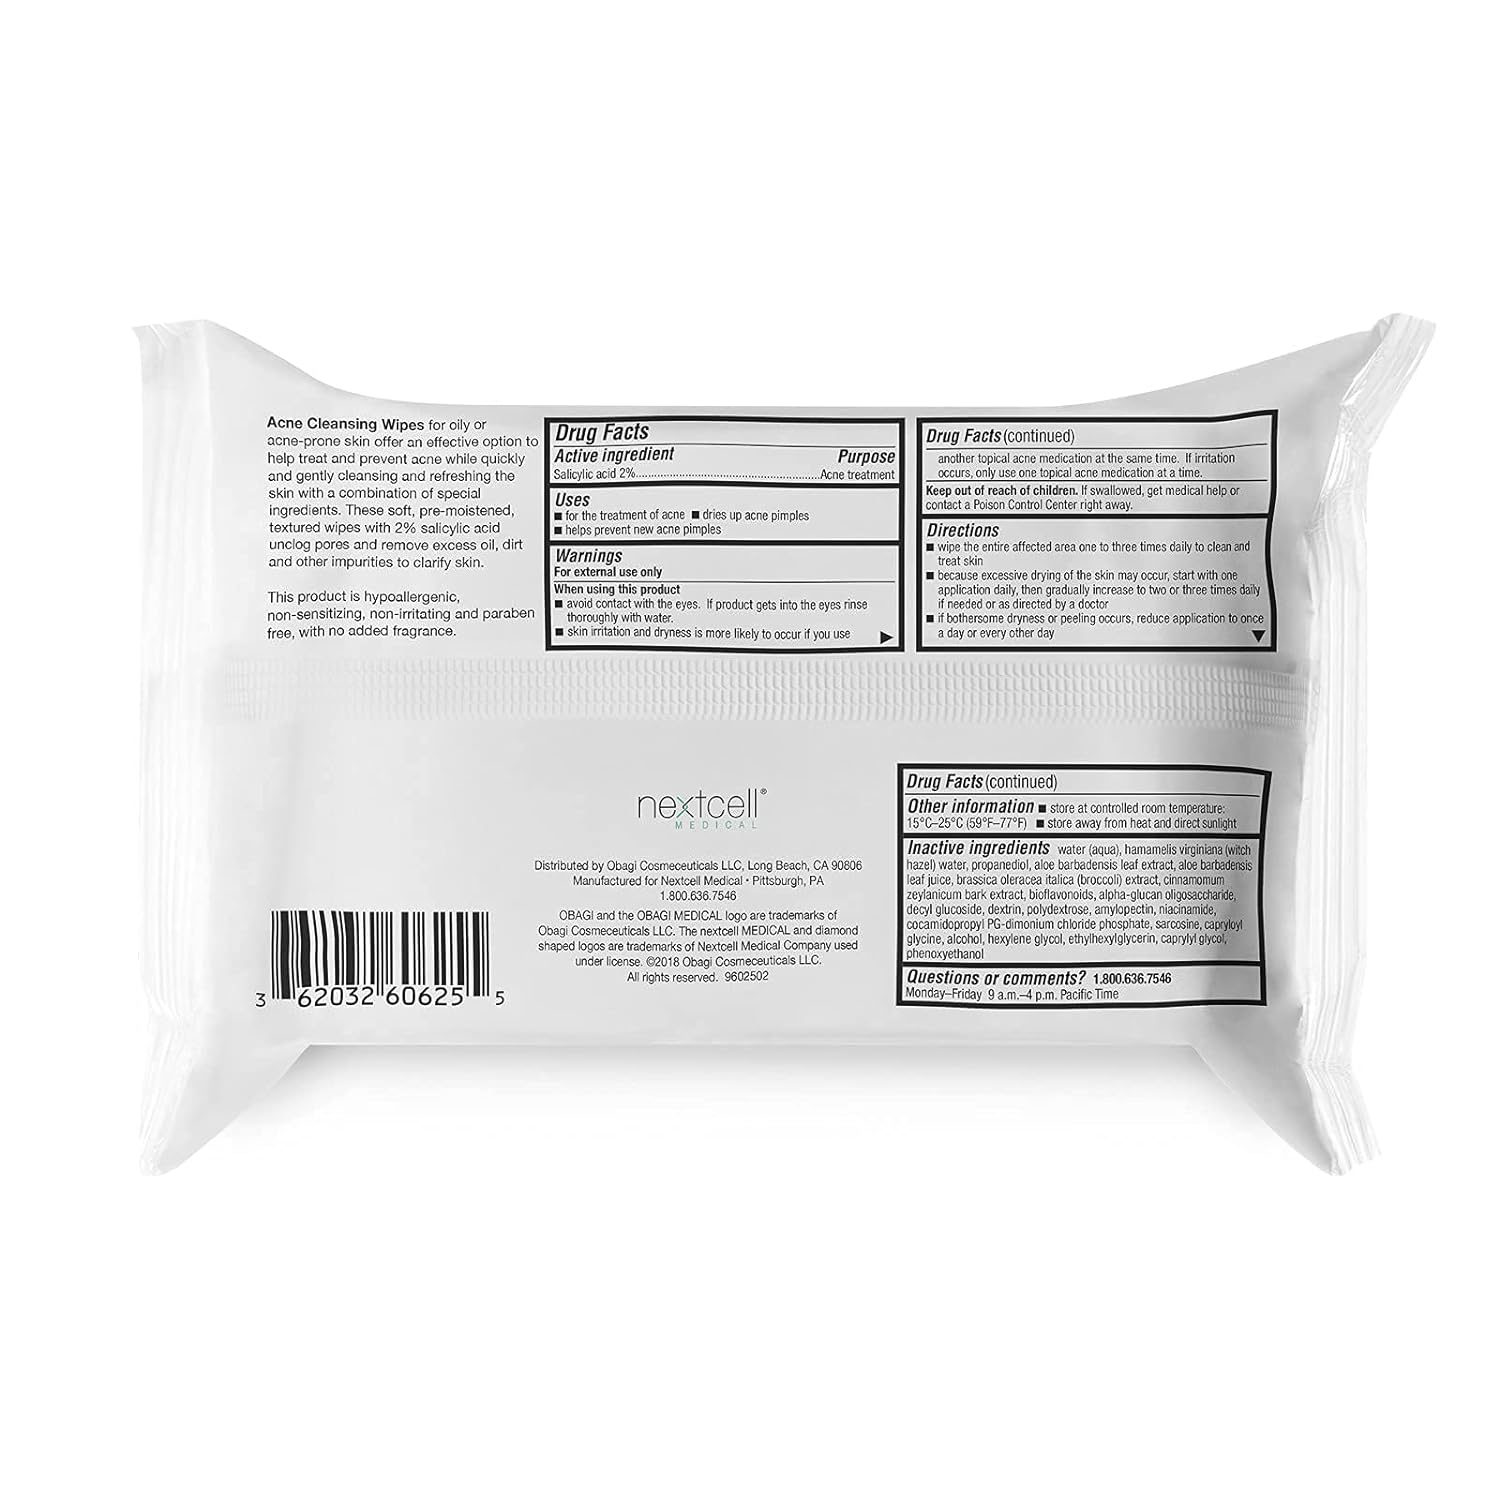 SUZANOBAGIMD On the Go Cleansing Wipes for Oily or Acne Prone Skin, 25 count Pack of 1 : Beauty & Personal Care